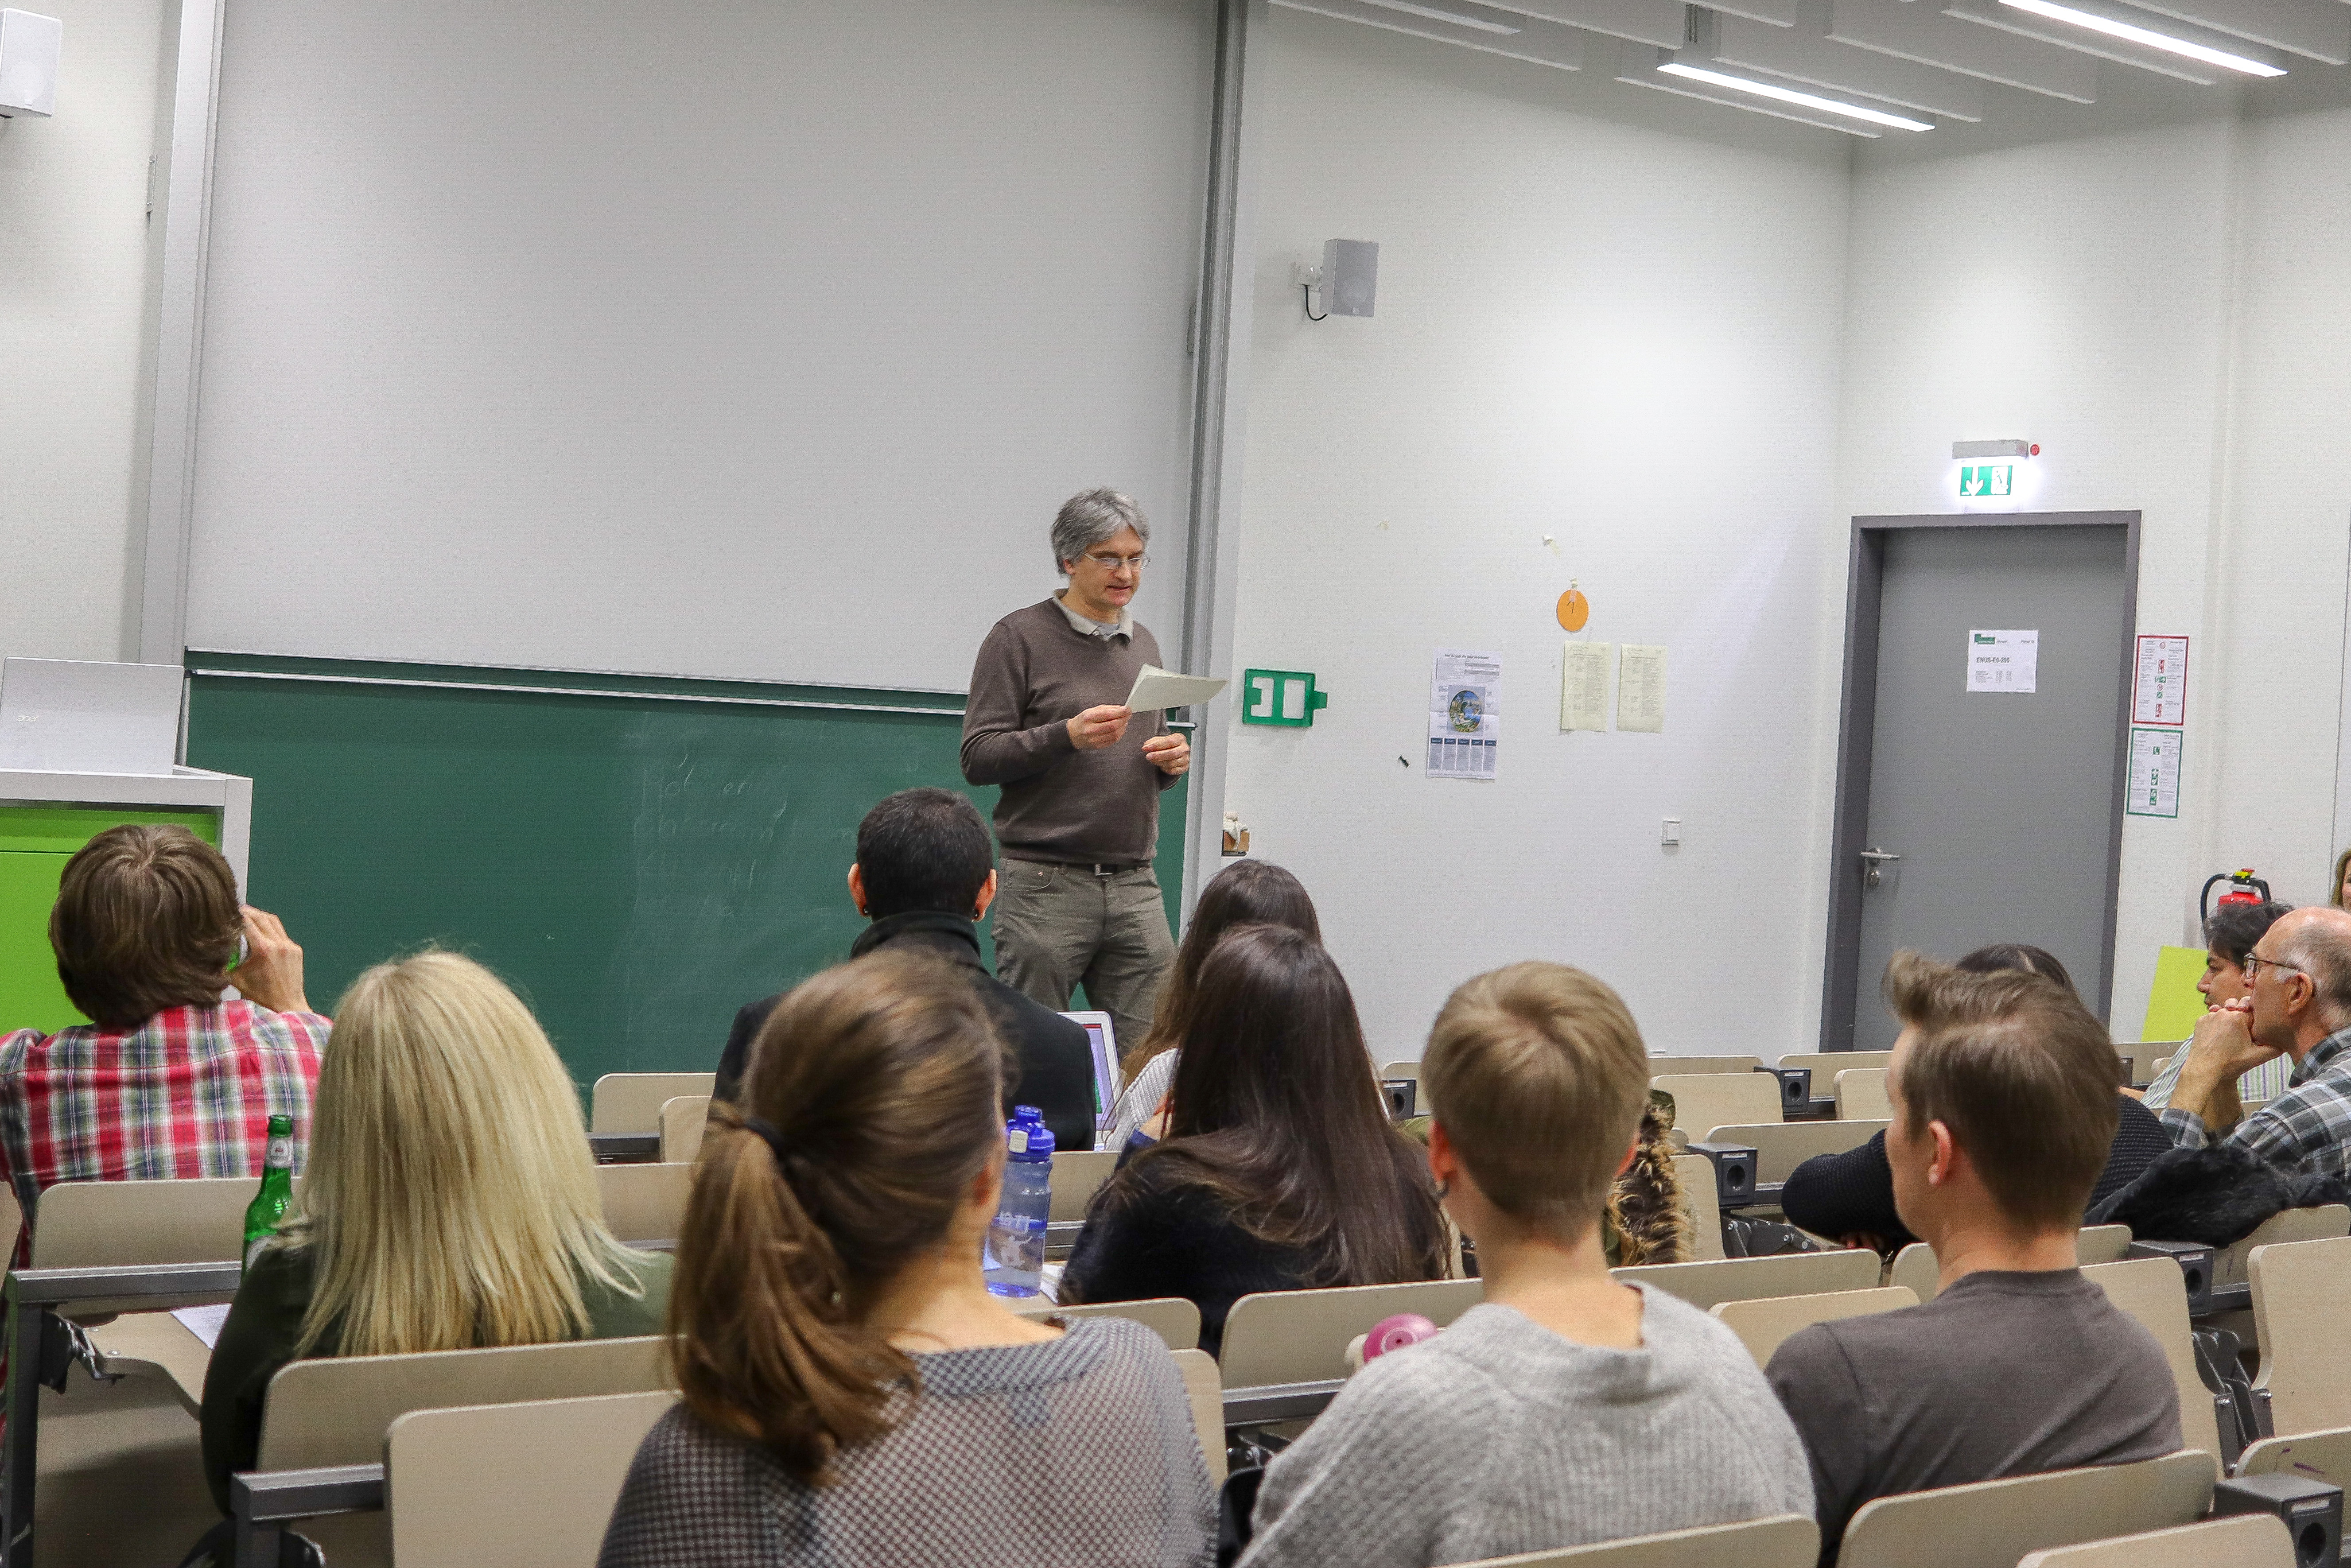 The picture shows professor Michael teaching, standing in front of some students 